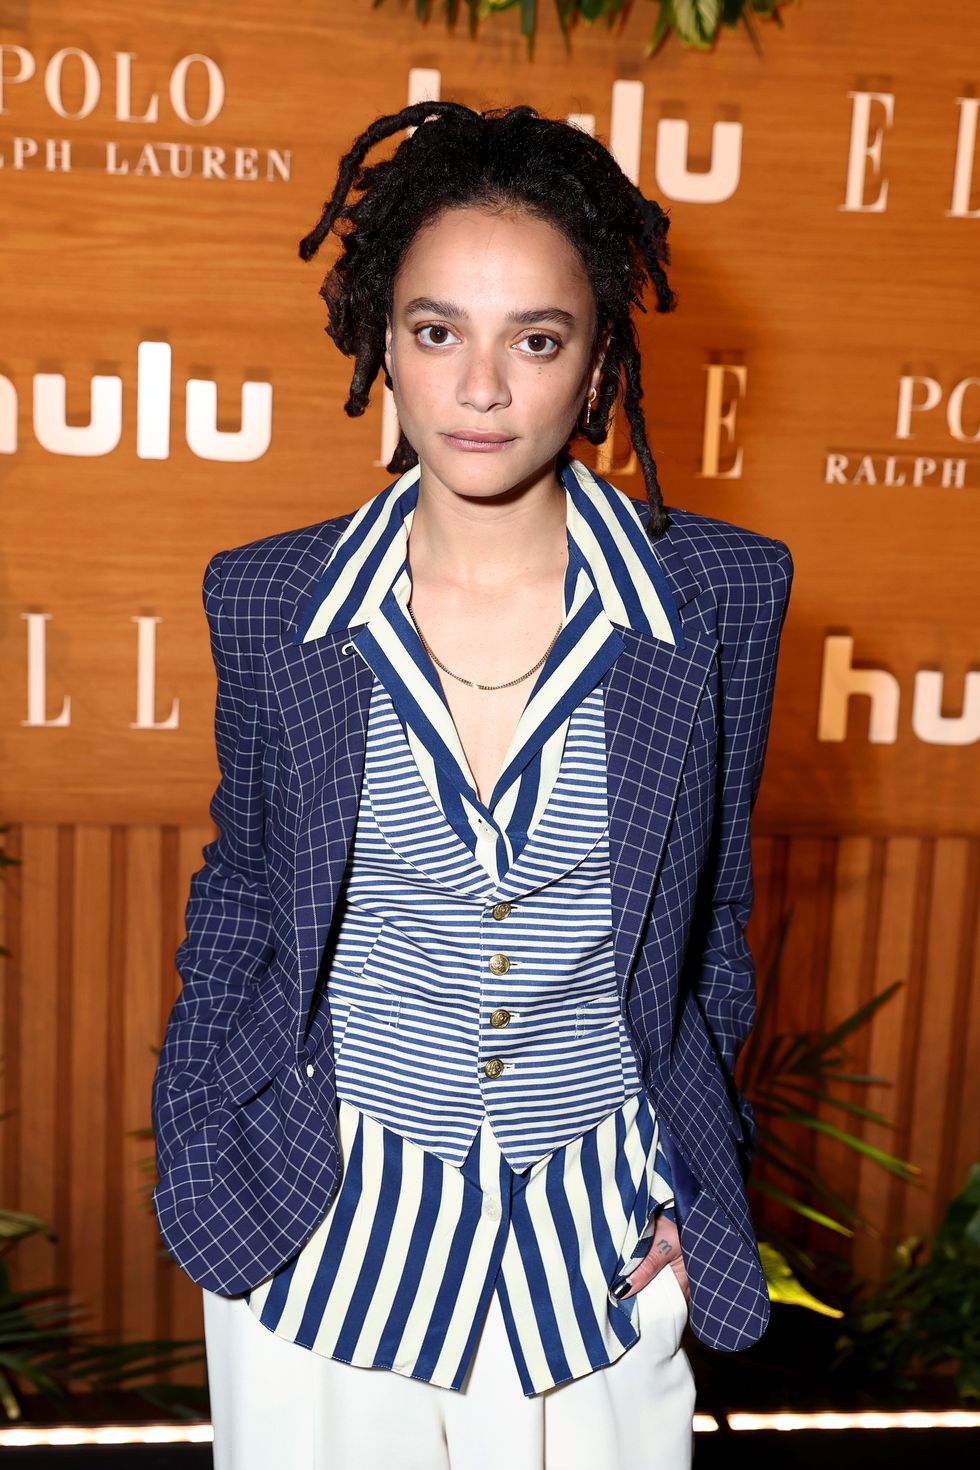 los angeles, california   may 18 sasha lane, wearing ralph lauren, attends elle hollywood rising presented by polo ralph lauren and hulu on may 18, 2022 in los angeles, california photo by matt winkelmeyergetty images for elle